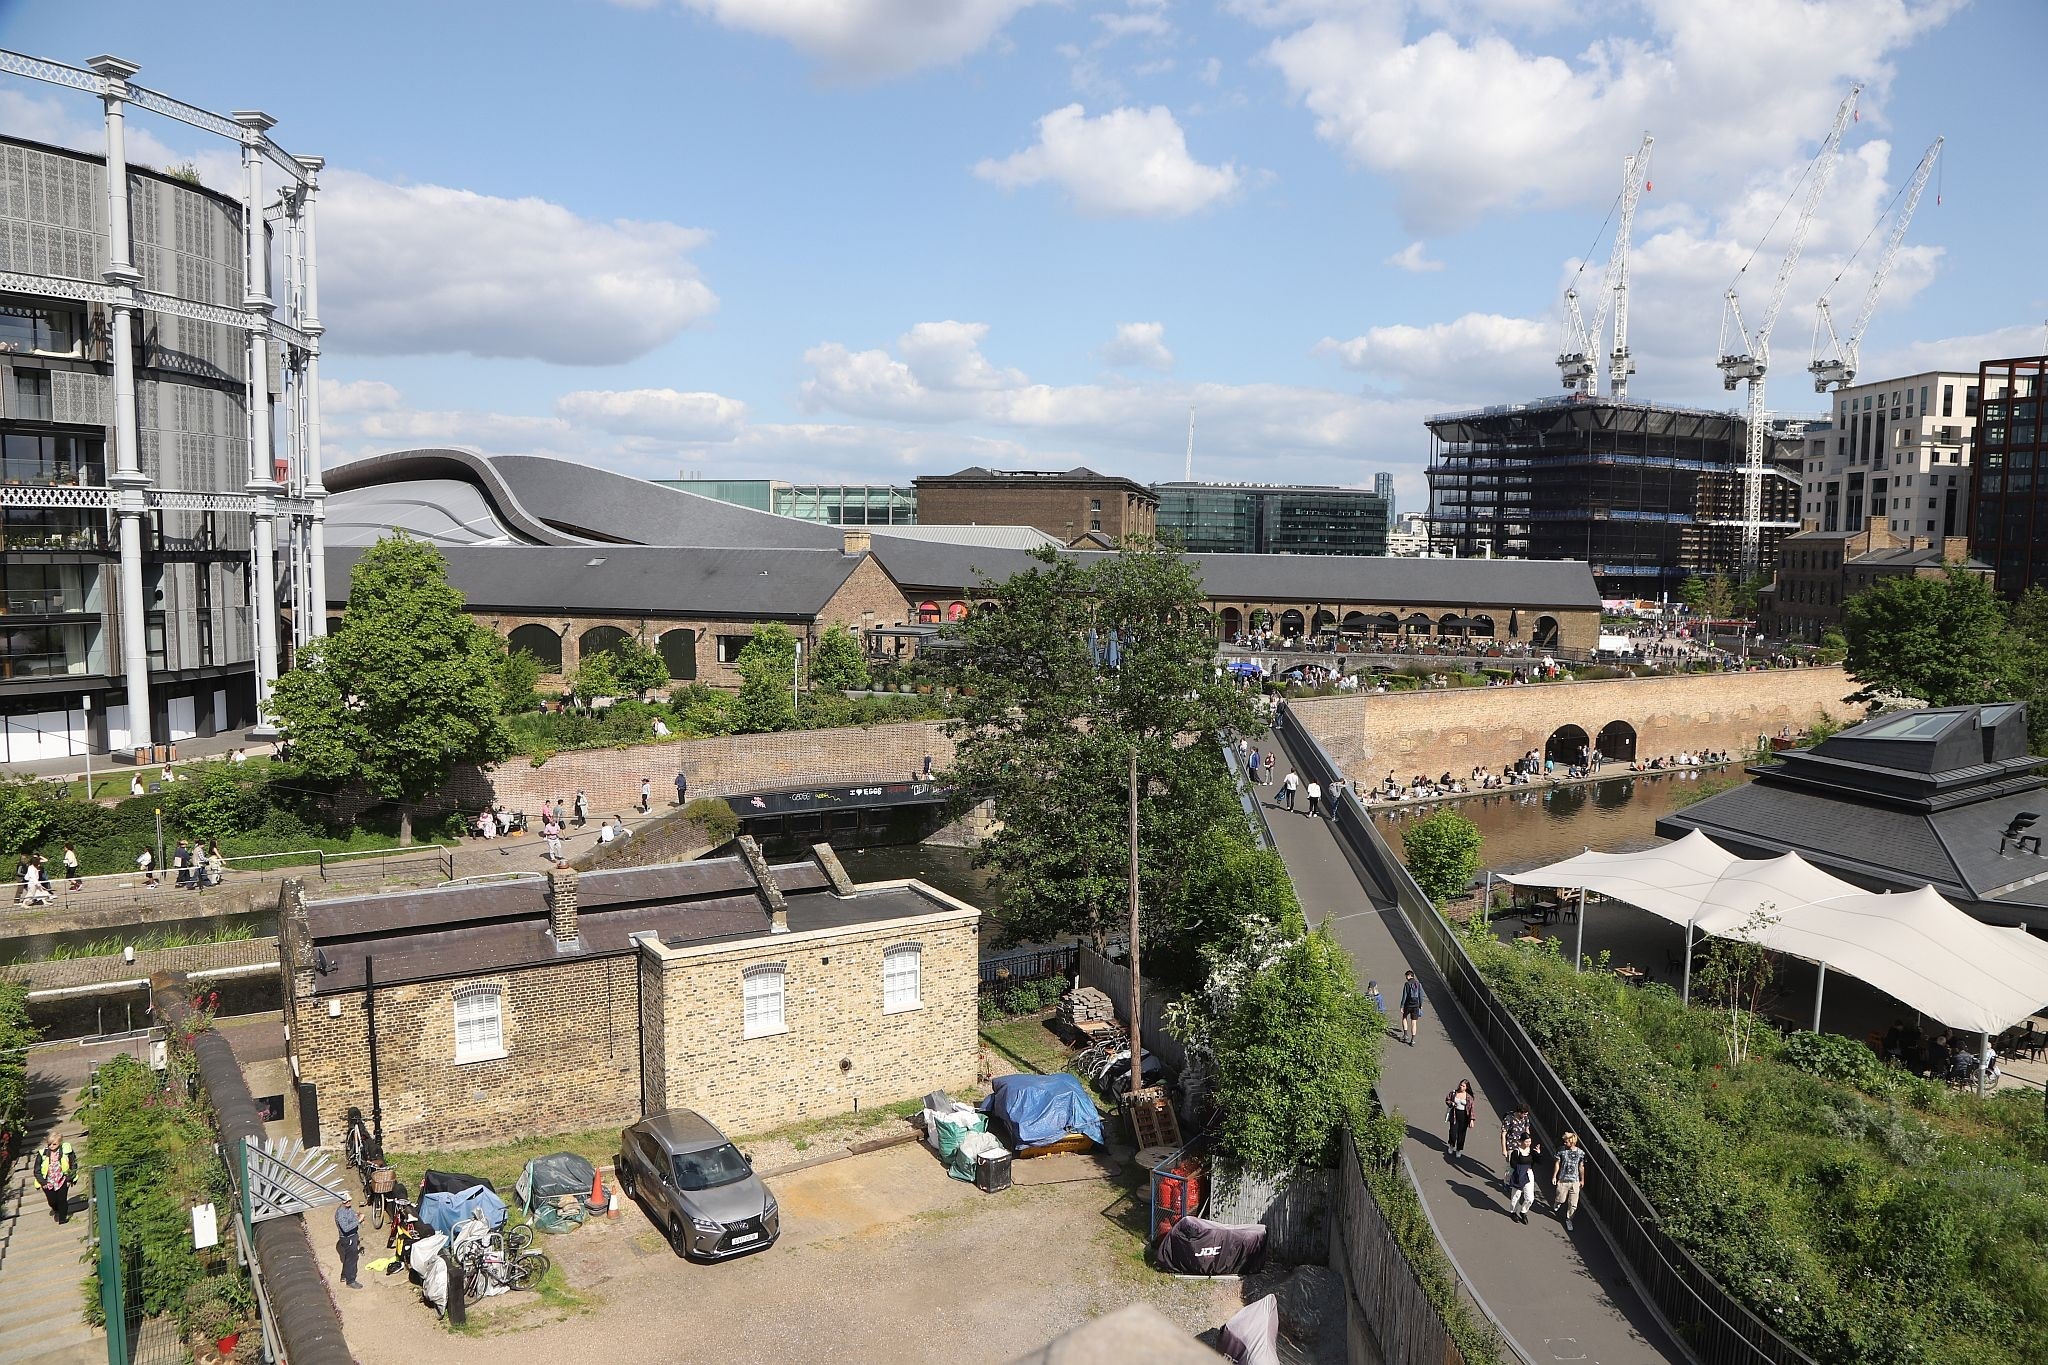 The view of Coal Drops Yard looking South East from the St Pancras waterpoint. Water tower. King's Cross. Coal Drops Yard. Regents Canal. 20-May-2023.